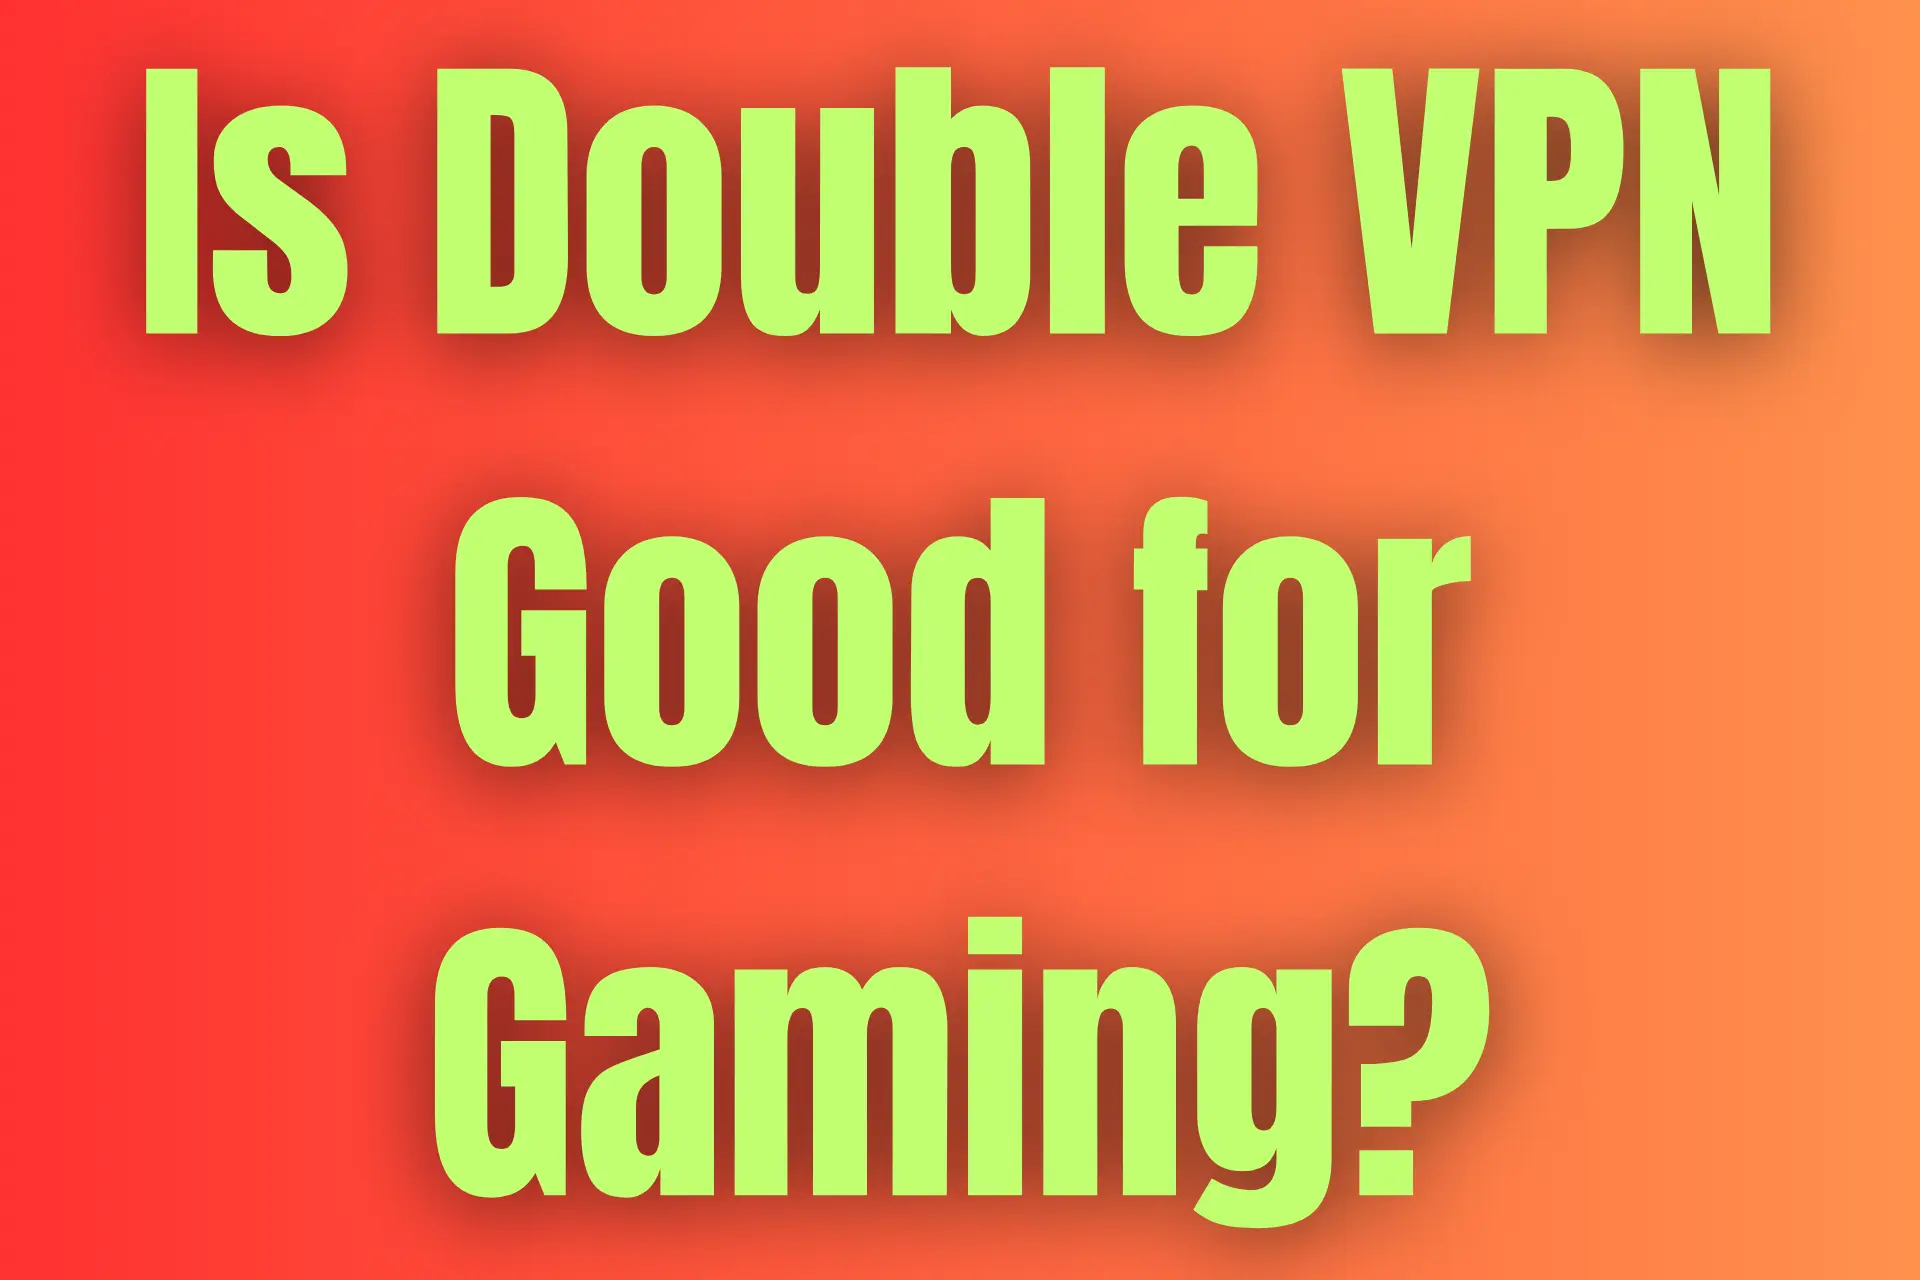 Is double VPN good for gaming?